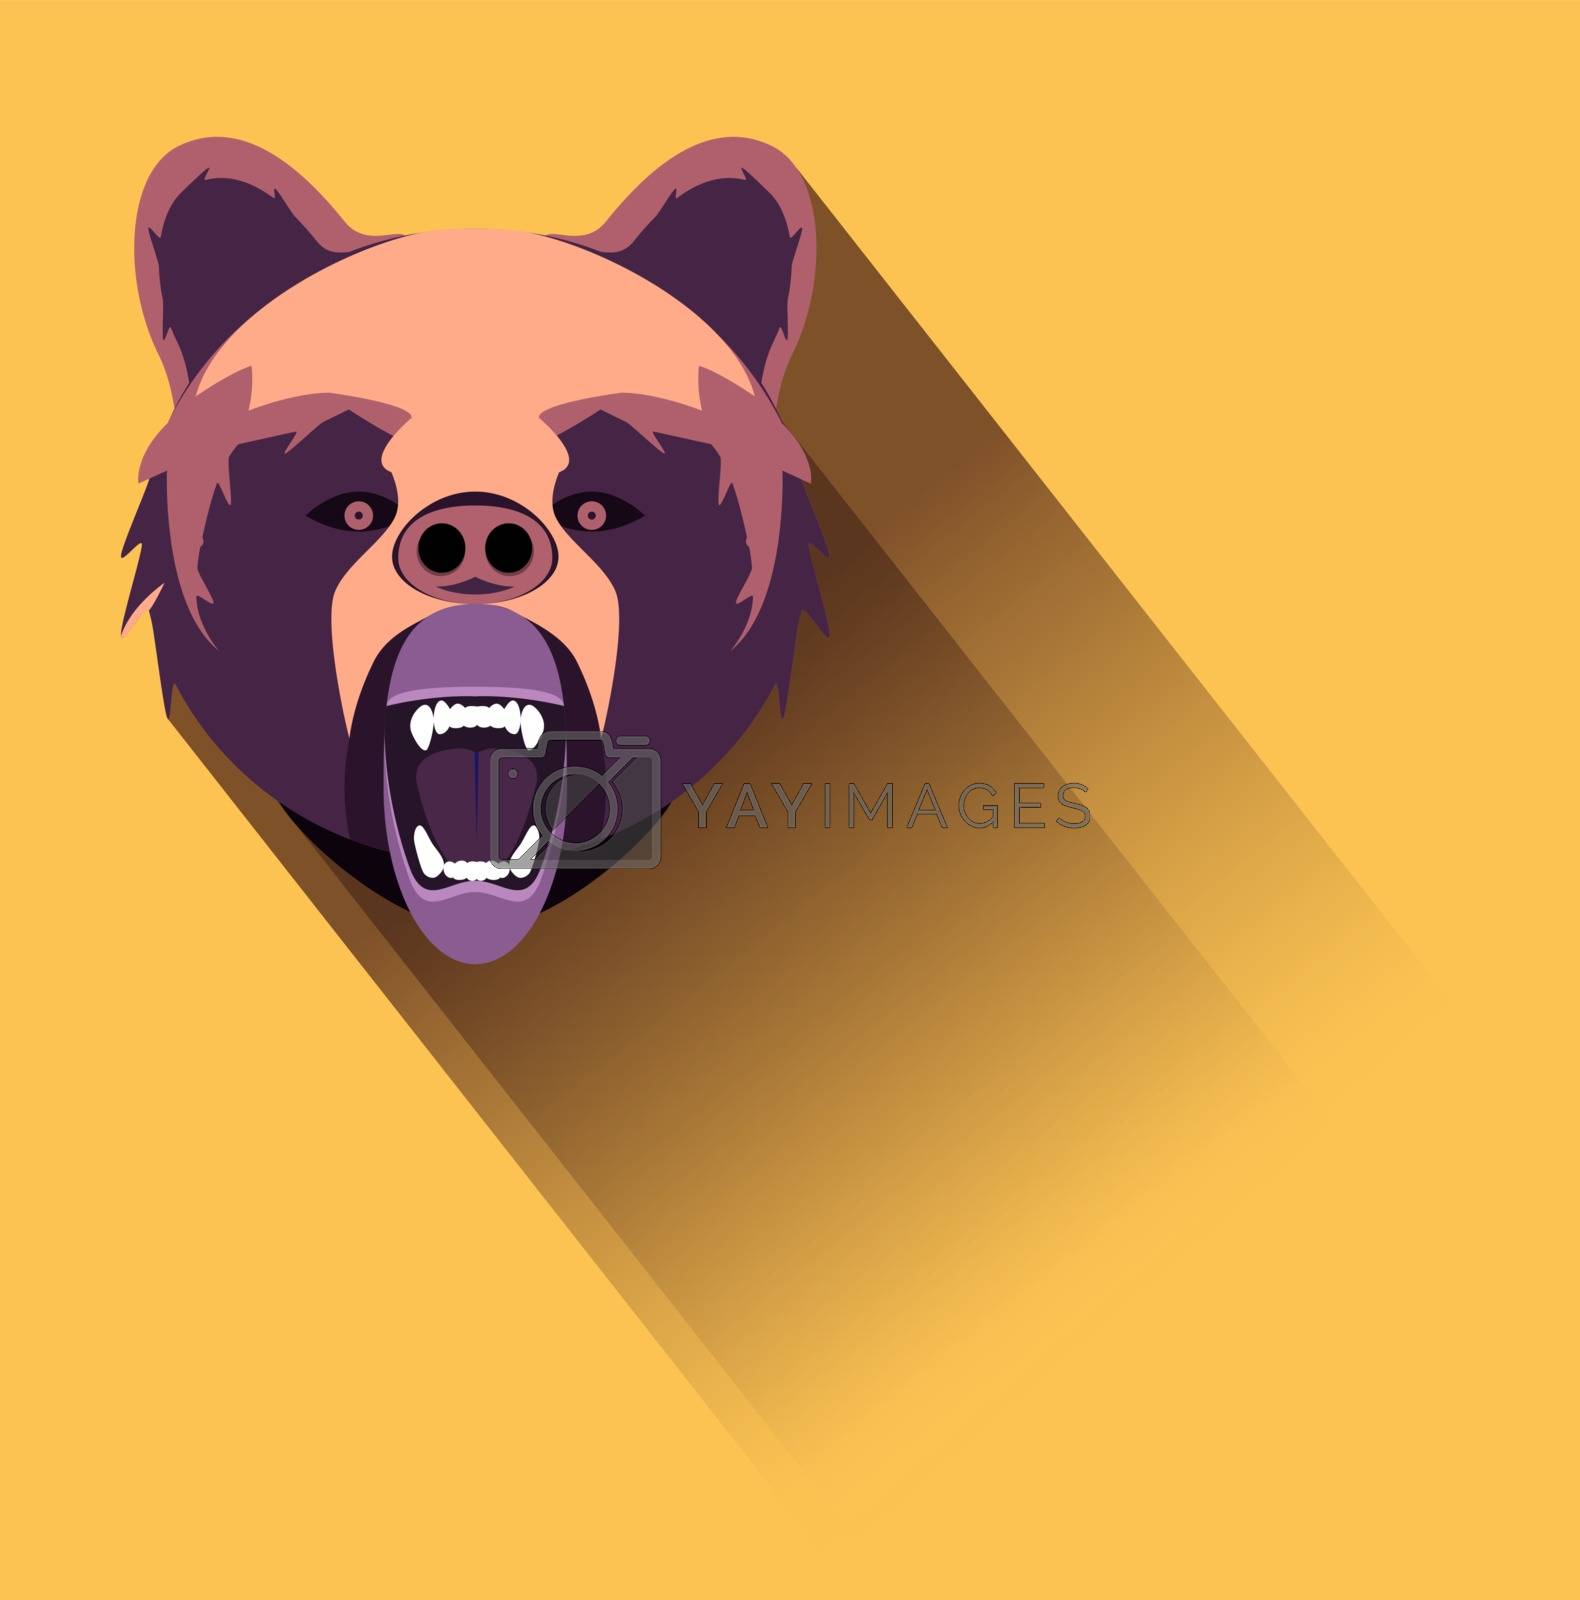 Royalty free image of angry bear by kovacevic